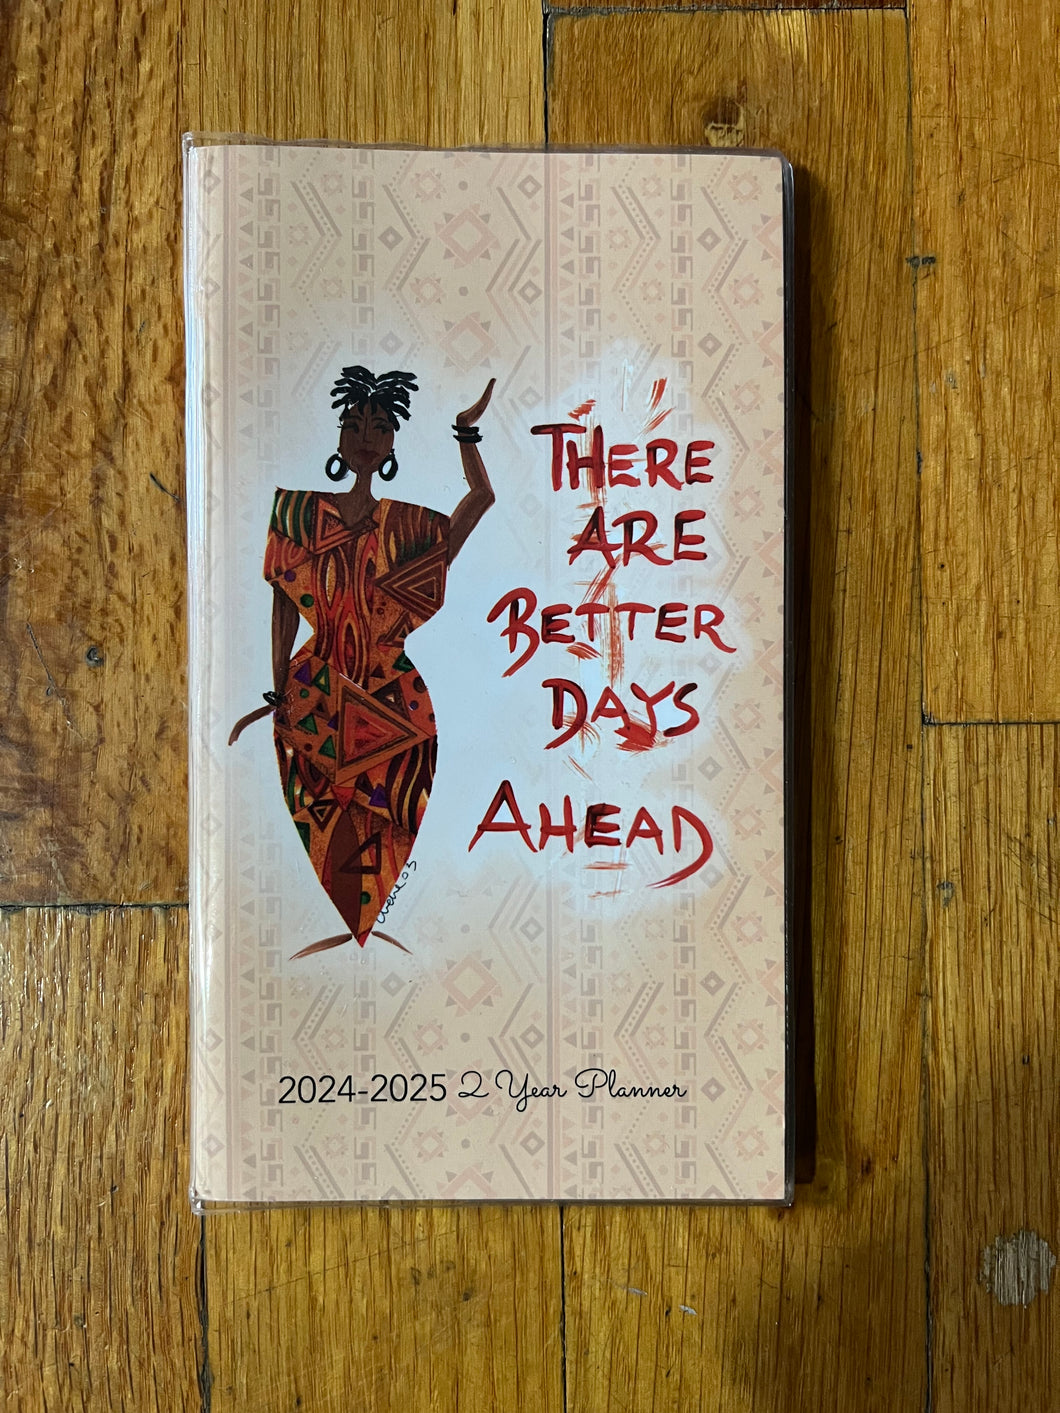 NEW!!! There Are Better Days Ahead 2024-2025 2-year Pocket Planners